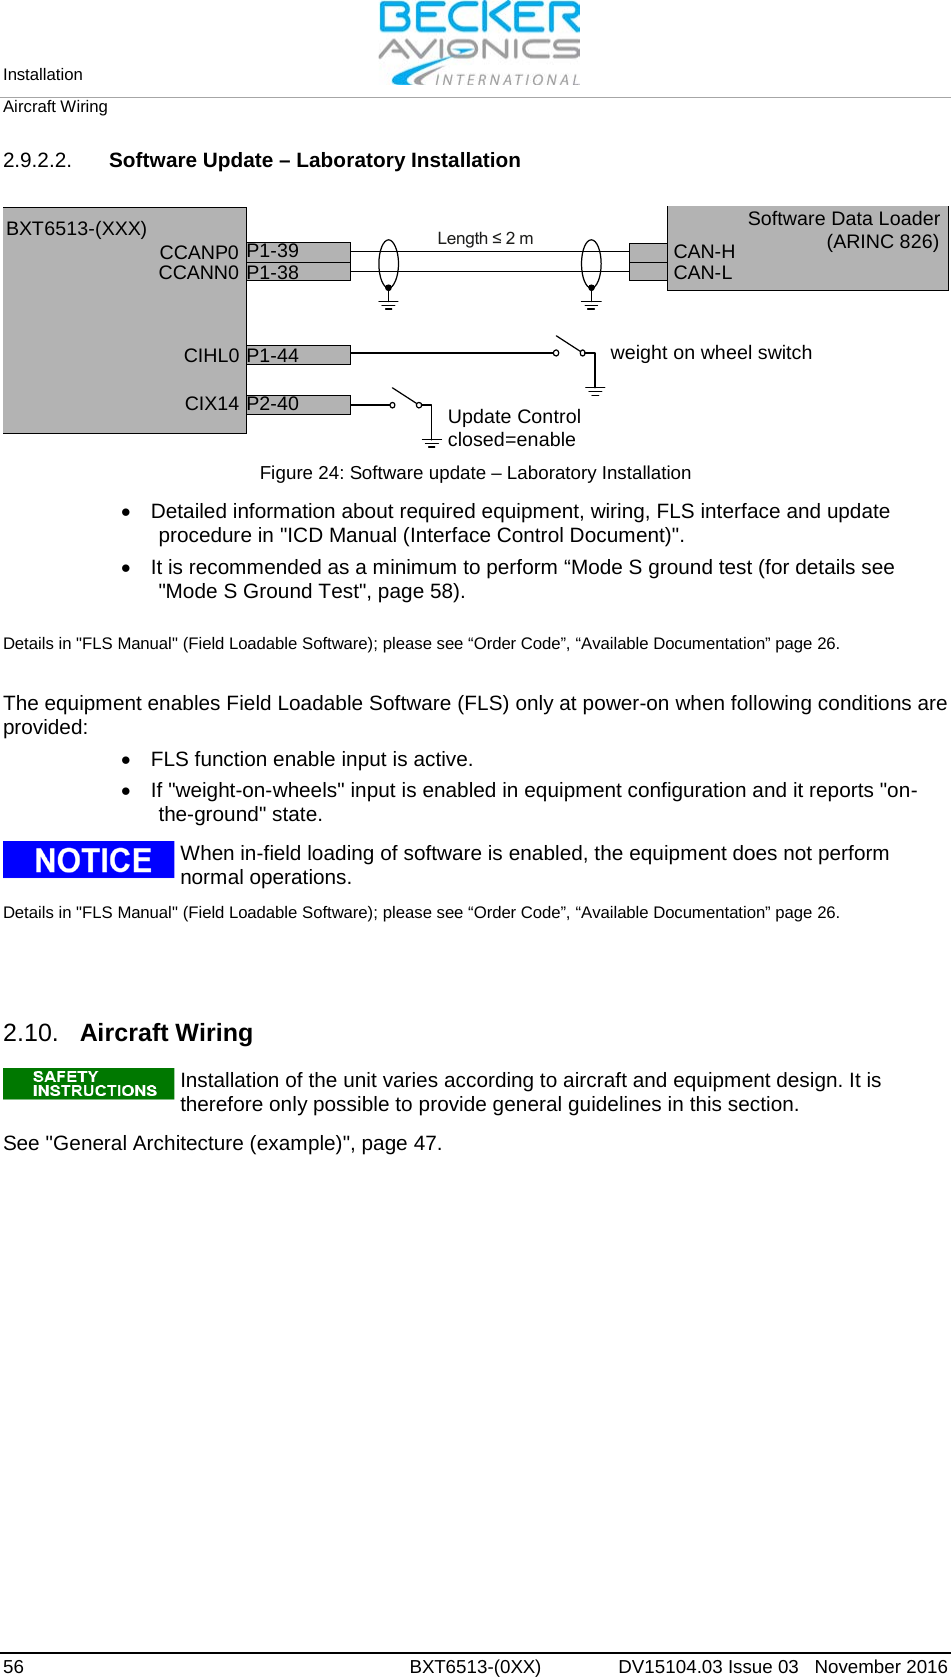 Installation   Aircraft Wiring  56 BXT6513-(0XX)  DV15104.03 Issue 03   November 2016 2.9.2.2. Software Update – Laboratory Installation  CCANP0CCANN0CIX14 P2-40CIHL0 P1-44Update Controlclosed=enableweight on wheel switchLength ≤ 2 mP1-39P1-38 CAN-HCAN-LBXT6513-(XXX) Software Data Loader(ARINC 826) Figure 24: Software update – Laboratory Installation  • Detailed information about required equipment, wiring, FLS interface and update procedure in &quot;ICD Manual (Interface Control Document)&quot;. • It is recommended as a minimum to perform “Mode S ground test (for details see &quot;Mode S Ground Test&quot;, page 58).  Details in &quot;FLS Manual&quot; (Field Loadable Software); please see “Order Code”, “Available Documentation” page 26.  The equipment enables Field Loadable Software (FLS) only at power-on when following conditions are provided: • FLS function enable input is active. • If &quot;weight-on-wheels&quot; input is enabled in equipment configuration and it reports &quot;on-the-ground&quot; state.   When in-field loading of software is enabled, the equipment does not perform normal operations.  Details in &quot;FLS Manual&quot; (Field Loadable Software); please see “Order Code”, “Available Documentation” page 26.    2.10. Aircraft Wiring   Installation of the unit varies according to aircraft and equipment design. It is therefore only possible to provide general guidelines in this section.   See &quot;General Architecture (example)&quot;, page 47.   